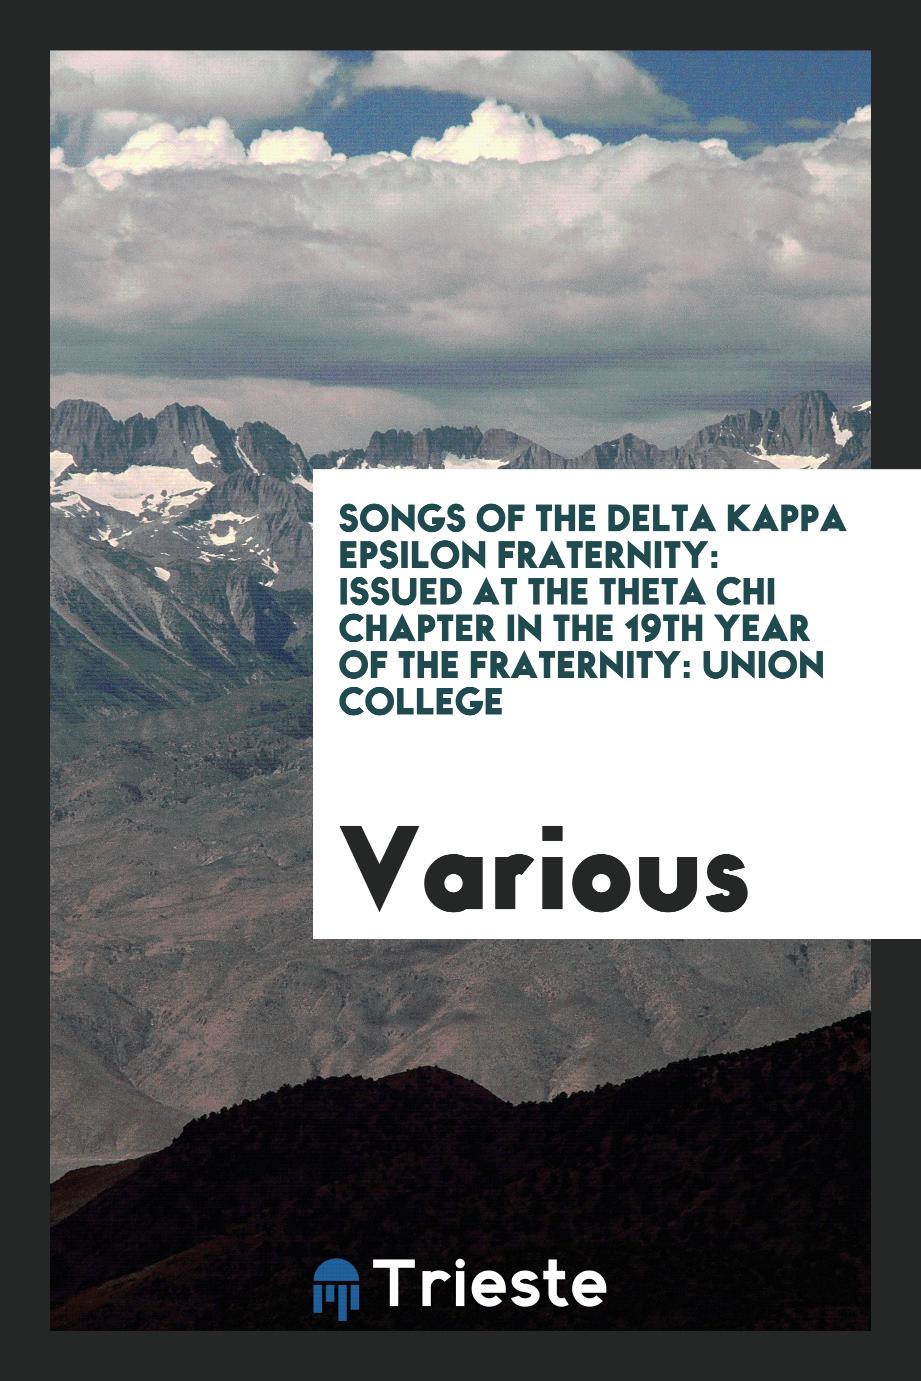 Songs of the Delta Kappa Epsilon Fraternity: Issued at the Theta Chi Chapter in the 19th Year of the fraternity: Union College